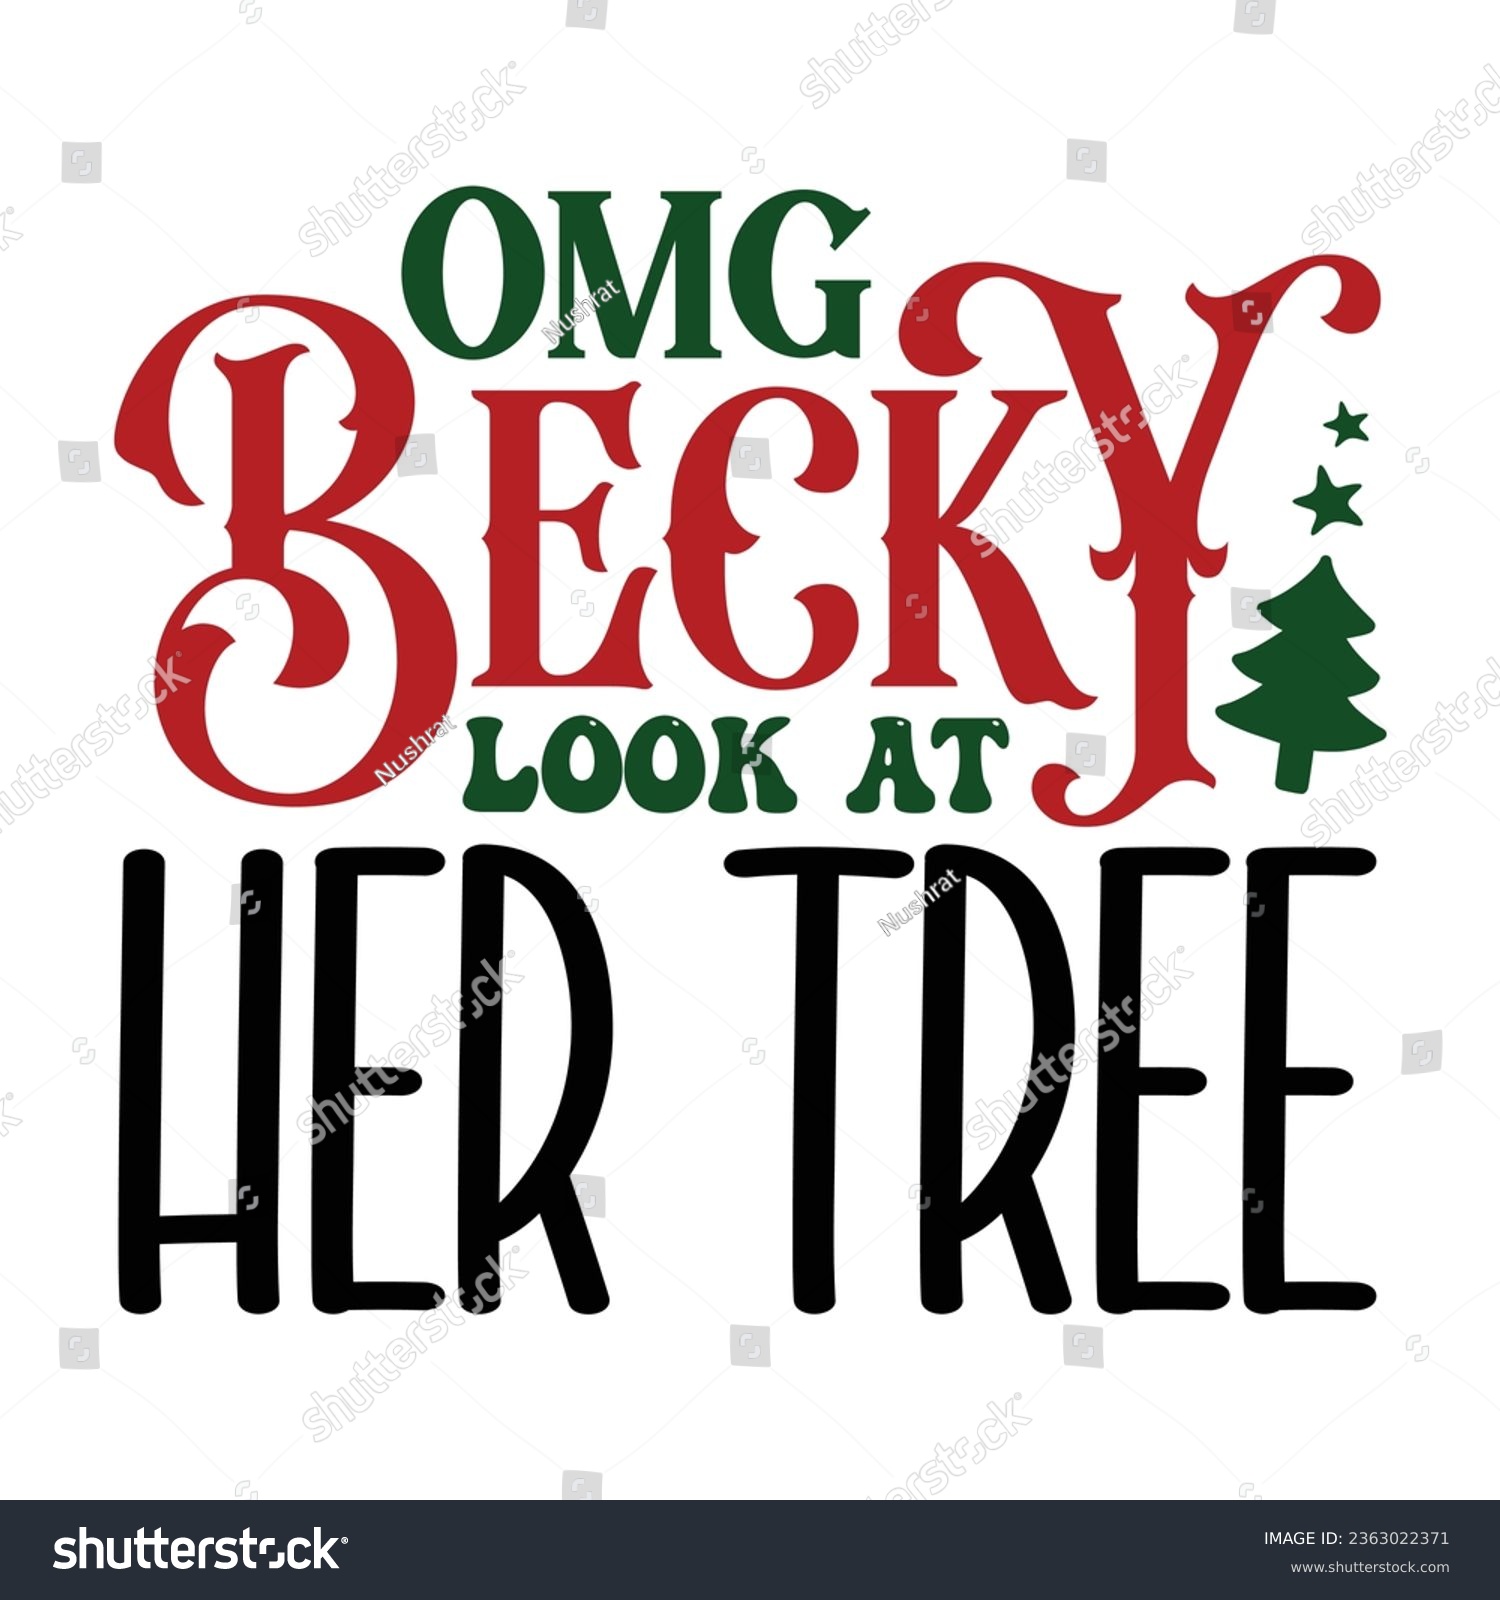 SVG of Omg Becky Look at Her Tree, Christmas SVG design Template, Christmas SVG Design, Christmas SVG Bundle. svg